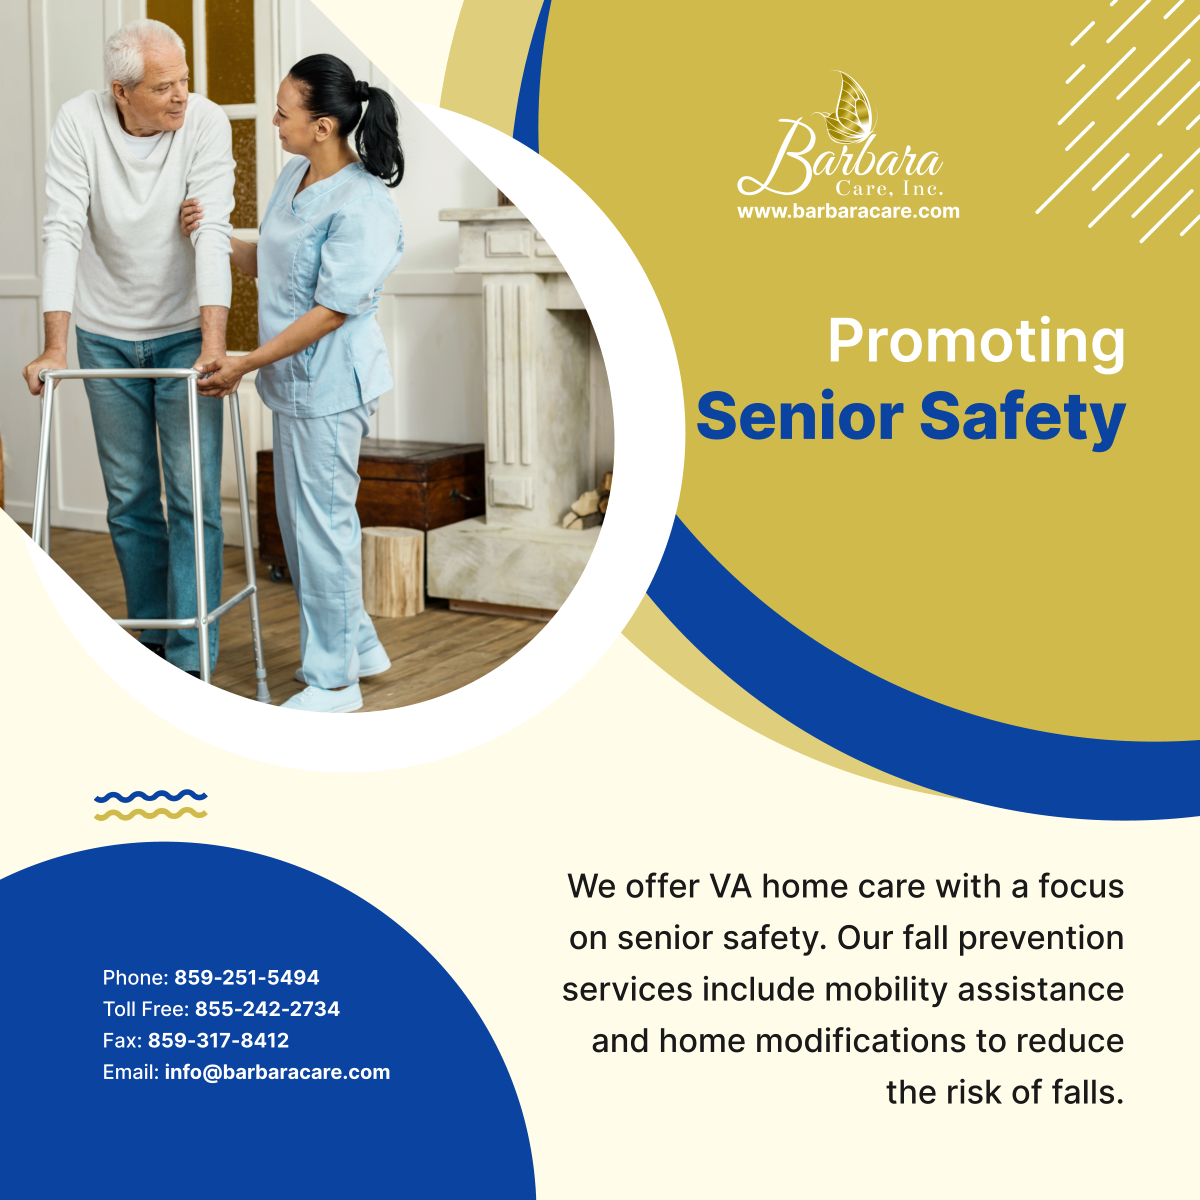 Protect your loved ones with our comprehensive fall prevention services. Call 859-251-5494 to inquire about our VA home care options. To learn more, visit tinyurl.com/mtnmrtzs. 

#SeniorSafety #FallPrevention #HomeSafety #LexingtonKentucky #HomeCare